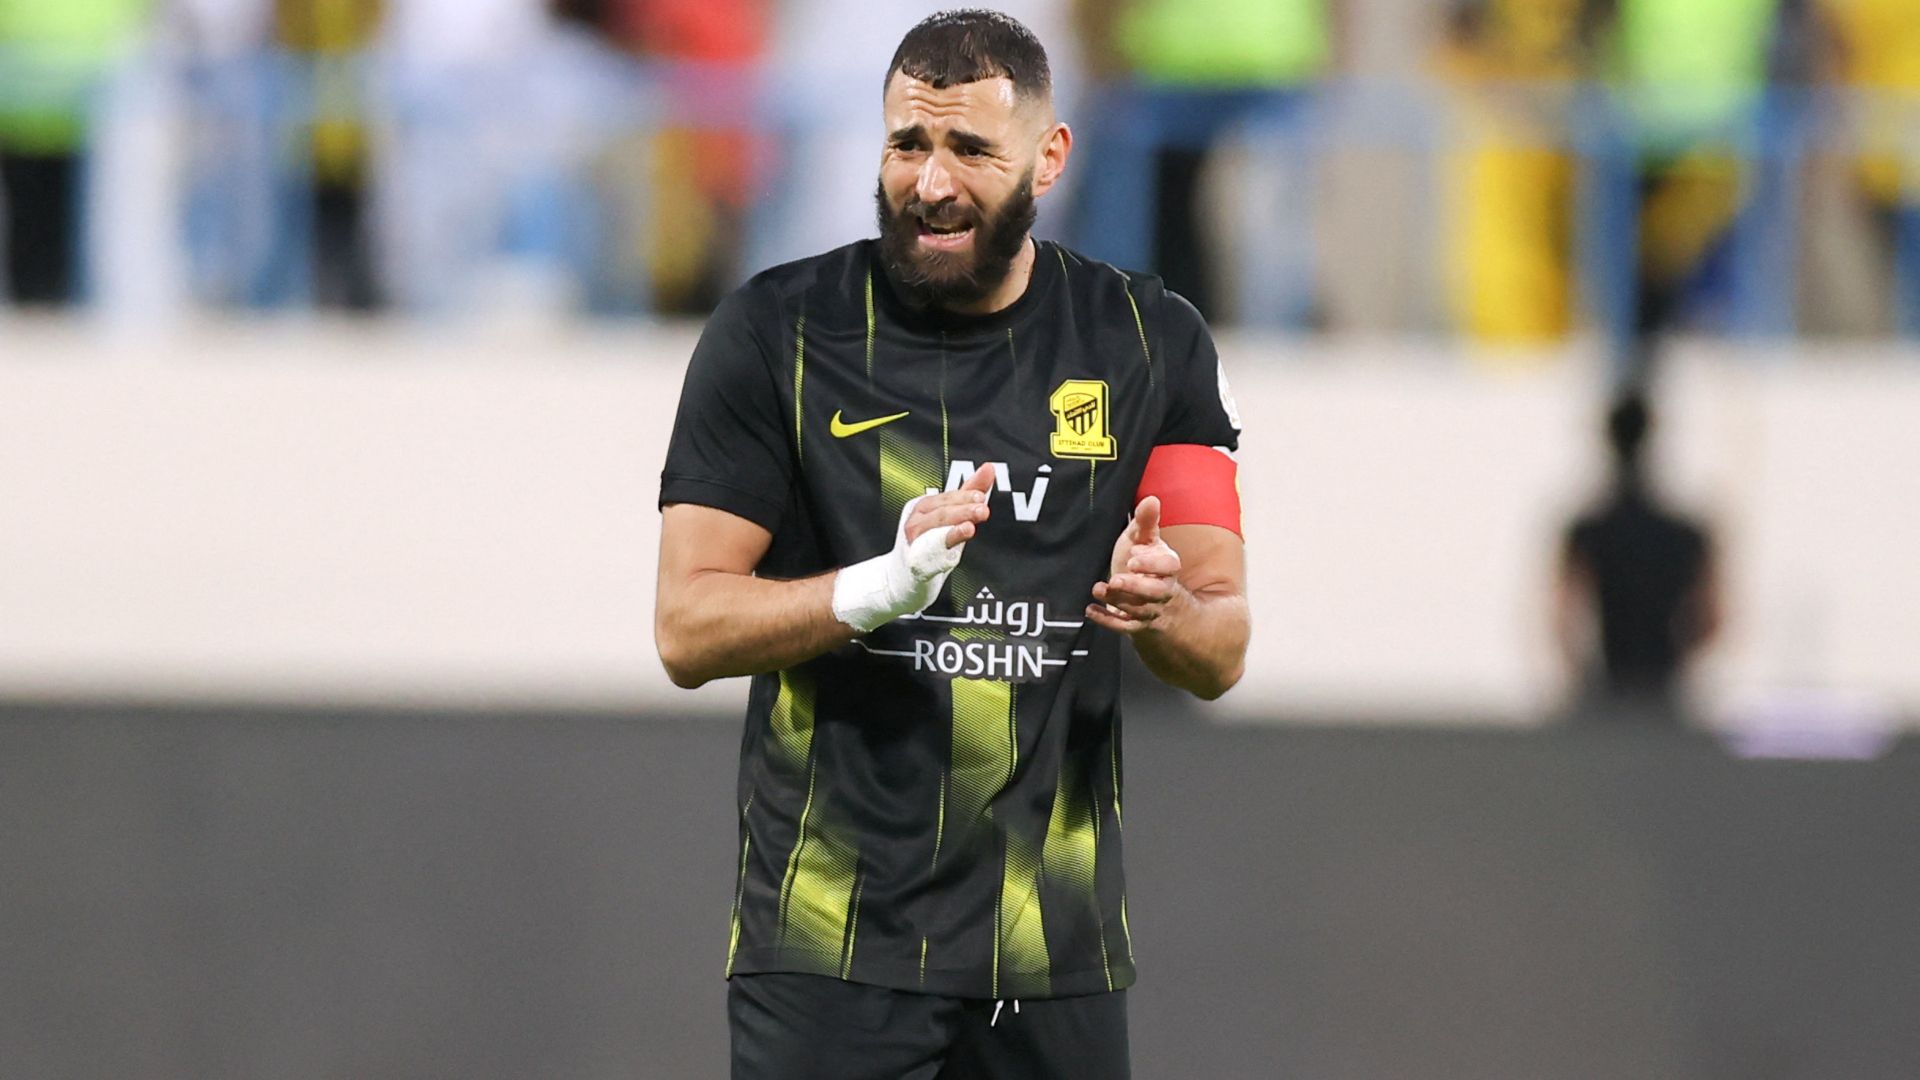 Saudi Pro League: Why even Ronaldo, Benzema and Neymar can't pull